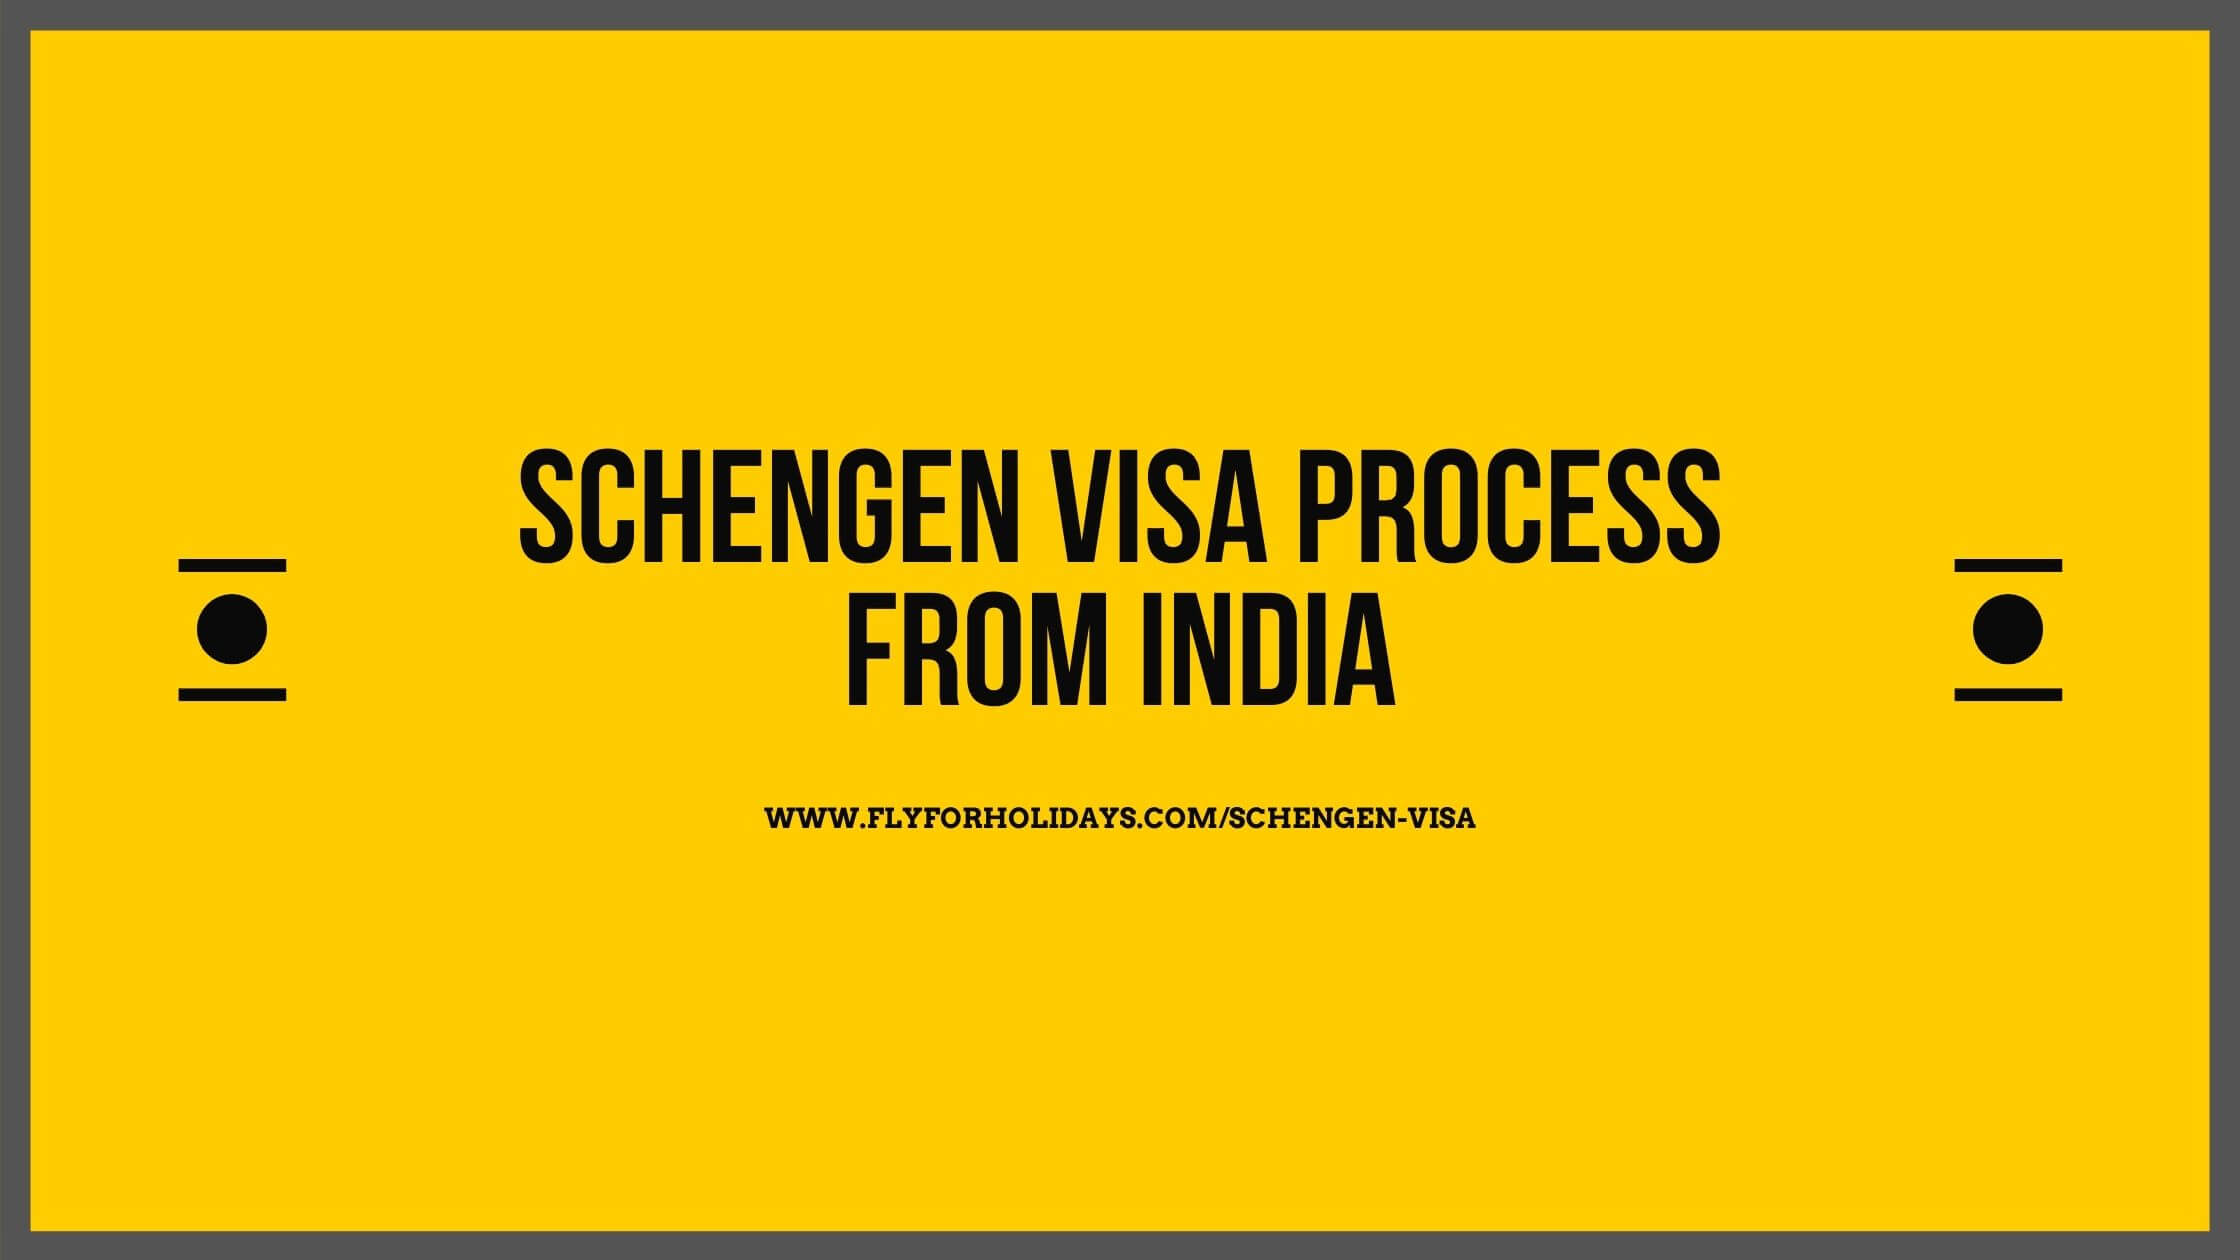 Schengen Visa Process From India - Fly For Holidays